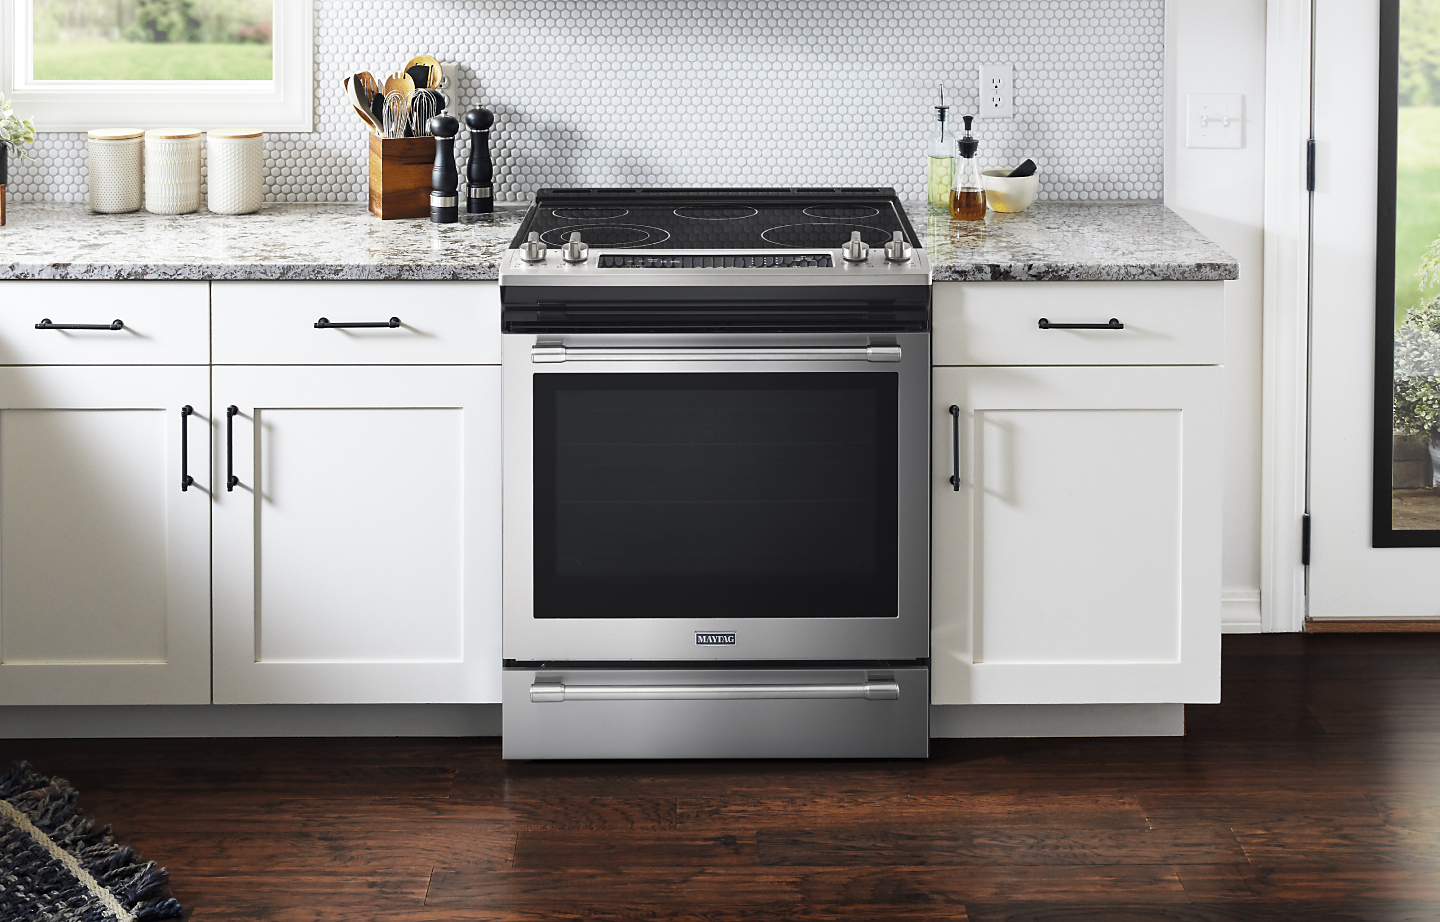 A convection range centered in a kitchen space.